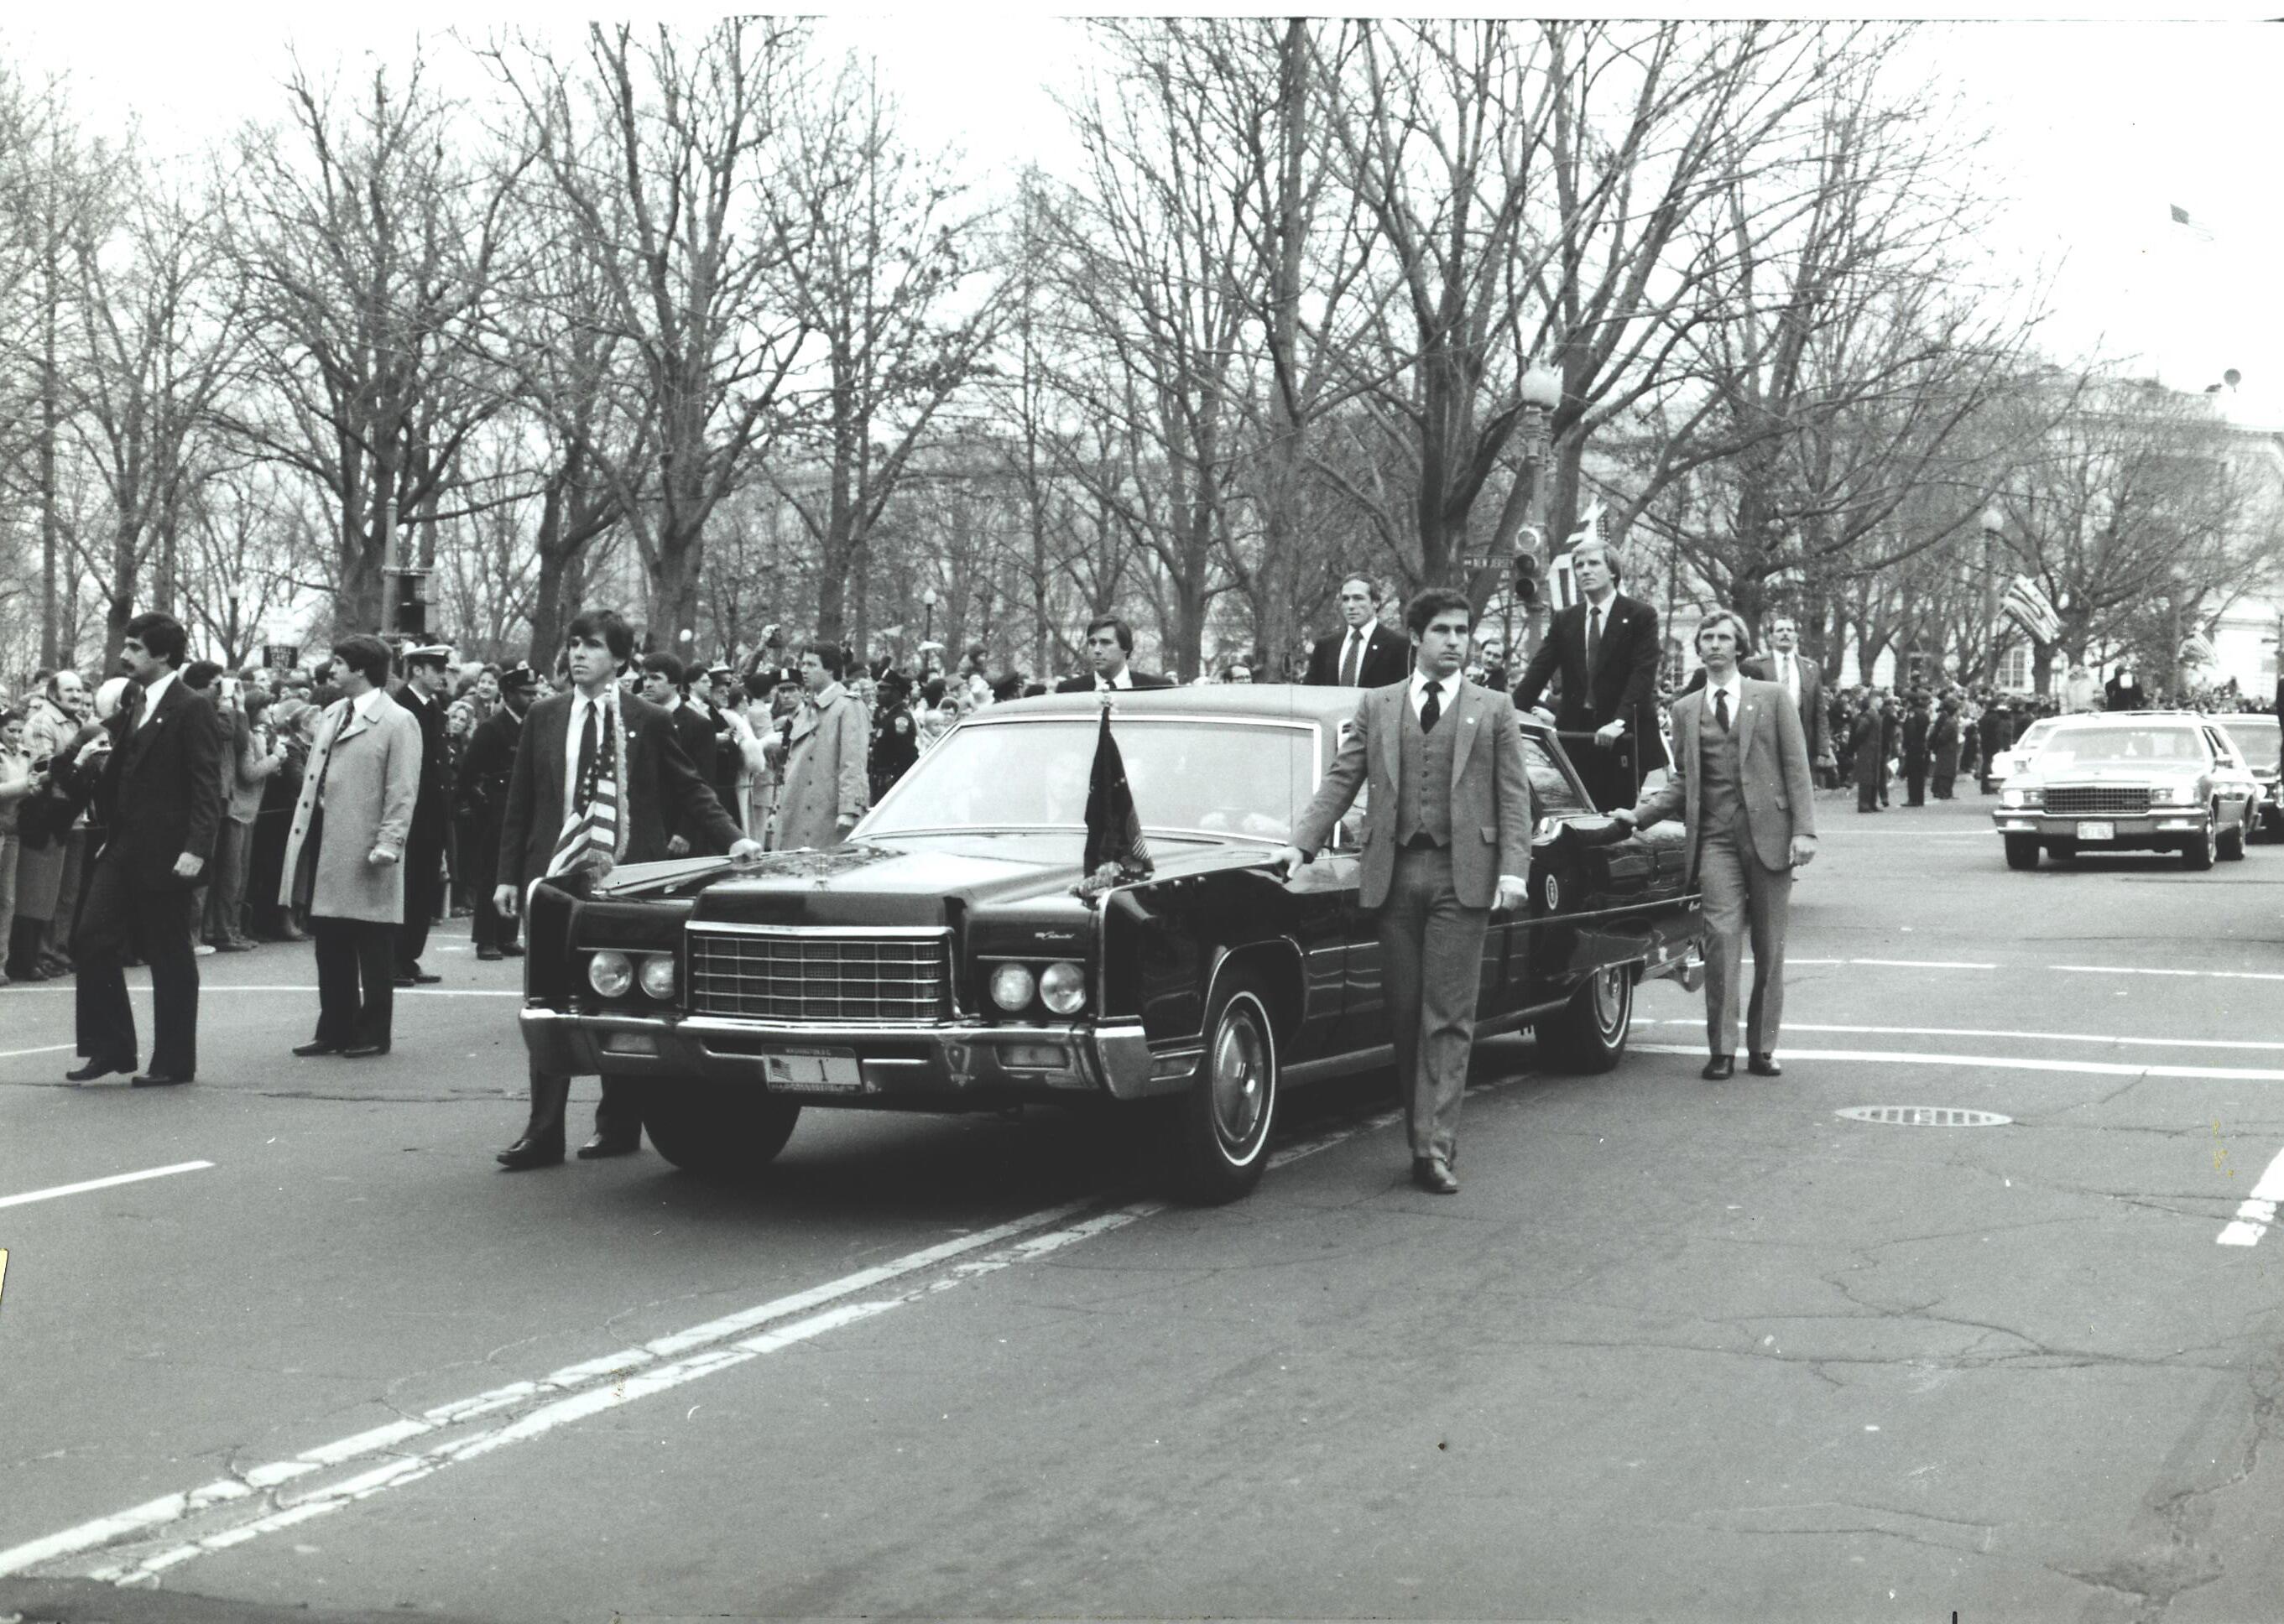 The 1972 Lincoln Parade Limousine was used by President Ronald Reagan on Inauguration day, January 20, 1981. In the aftermath of the assassination attempt on President Reagan on March 30, 1981, the vehicle was returned to the Ford Motor Company for refurbishing. It received a new interior and the exterior was updated to appear as a 1979 Lincoln.